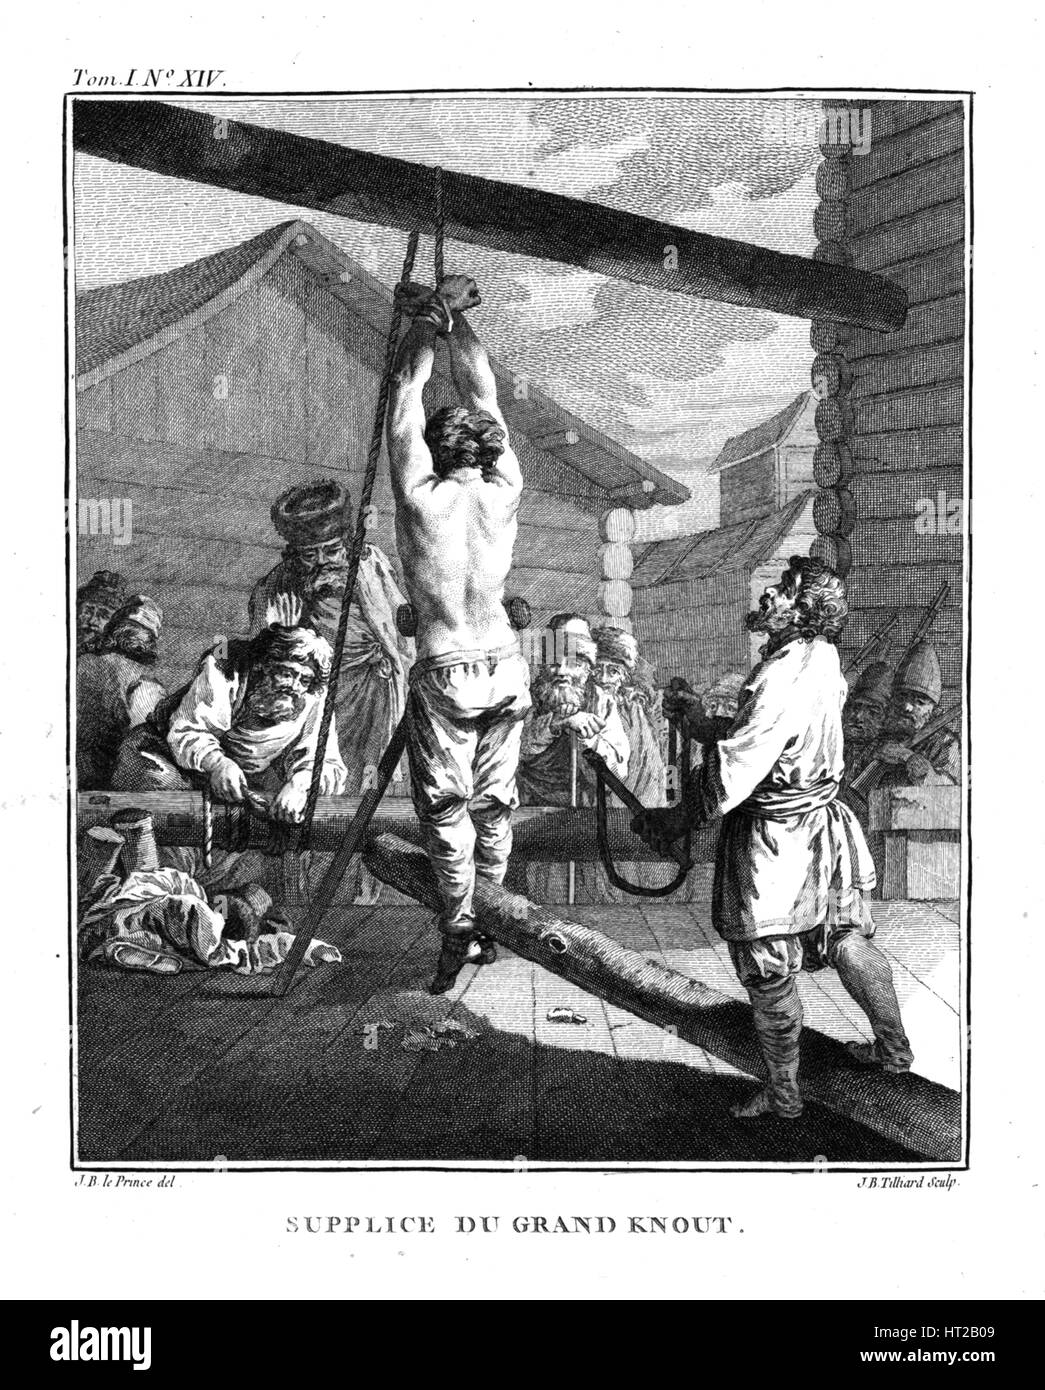 Punishment with a Great Knout. From Voyage en Sibérie, 1766. Artist: Le Prince, Jean-Baptiste (1734-1781) Stock Photo